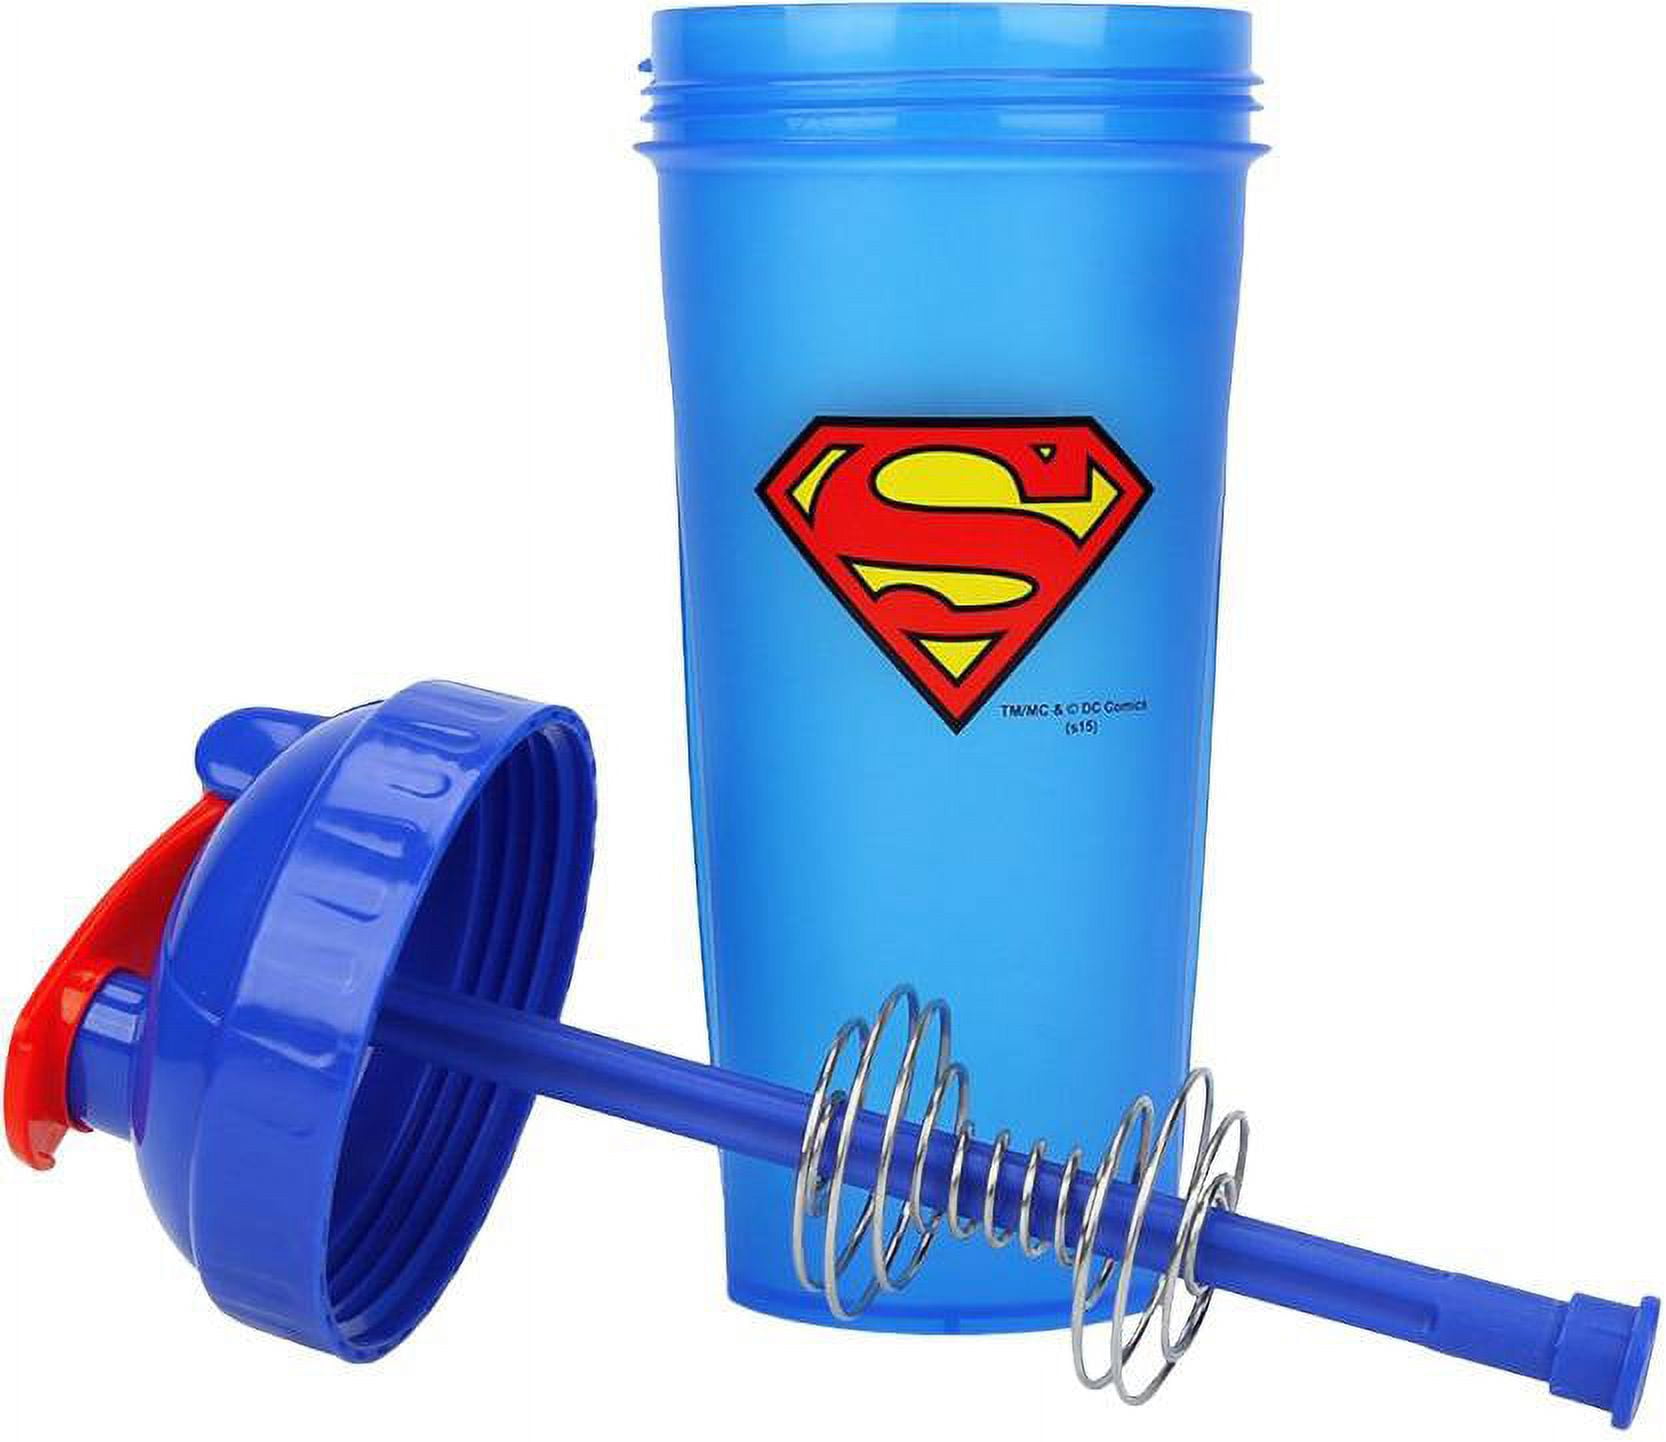 Performa Activ 28 Oz. Dc Comics Collection Shaker Cup - Supergirl